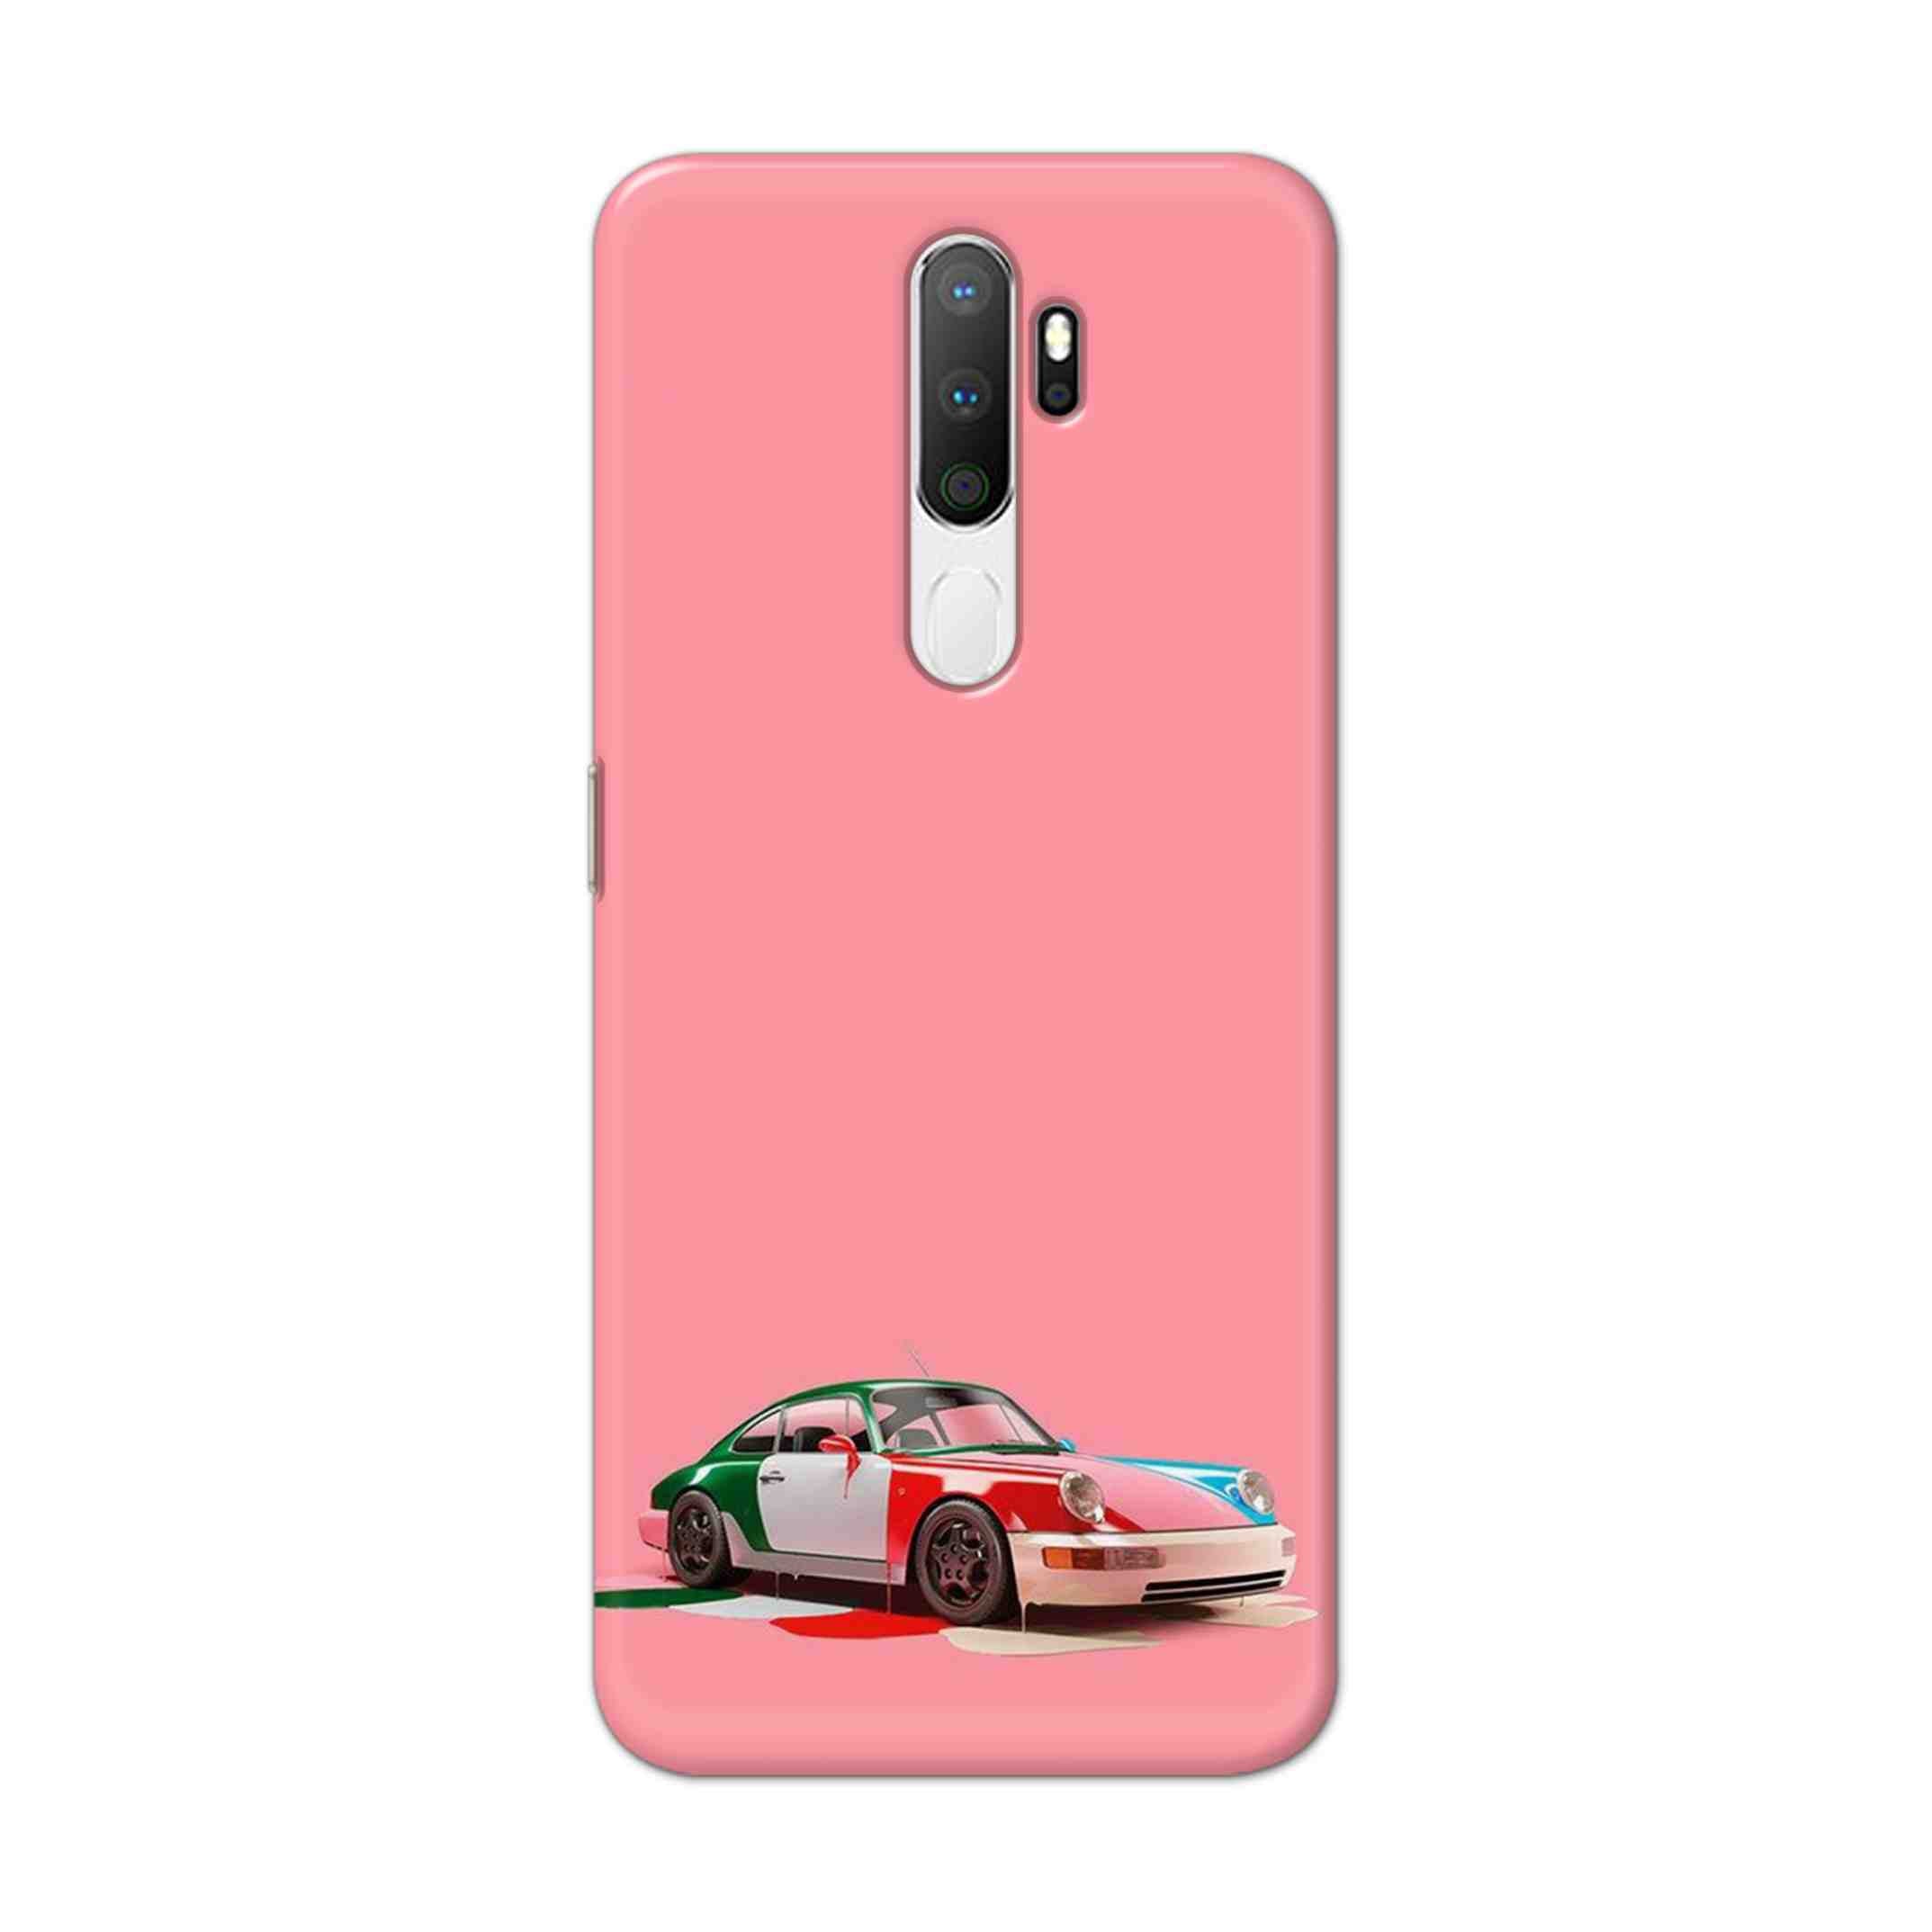 Buy Pink Porche Hard Back Mobile Phone Case Cover For Oppo A5 (2020) Online